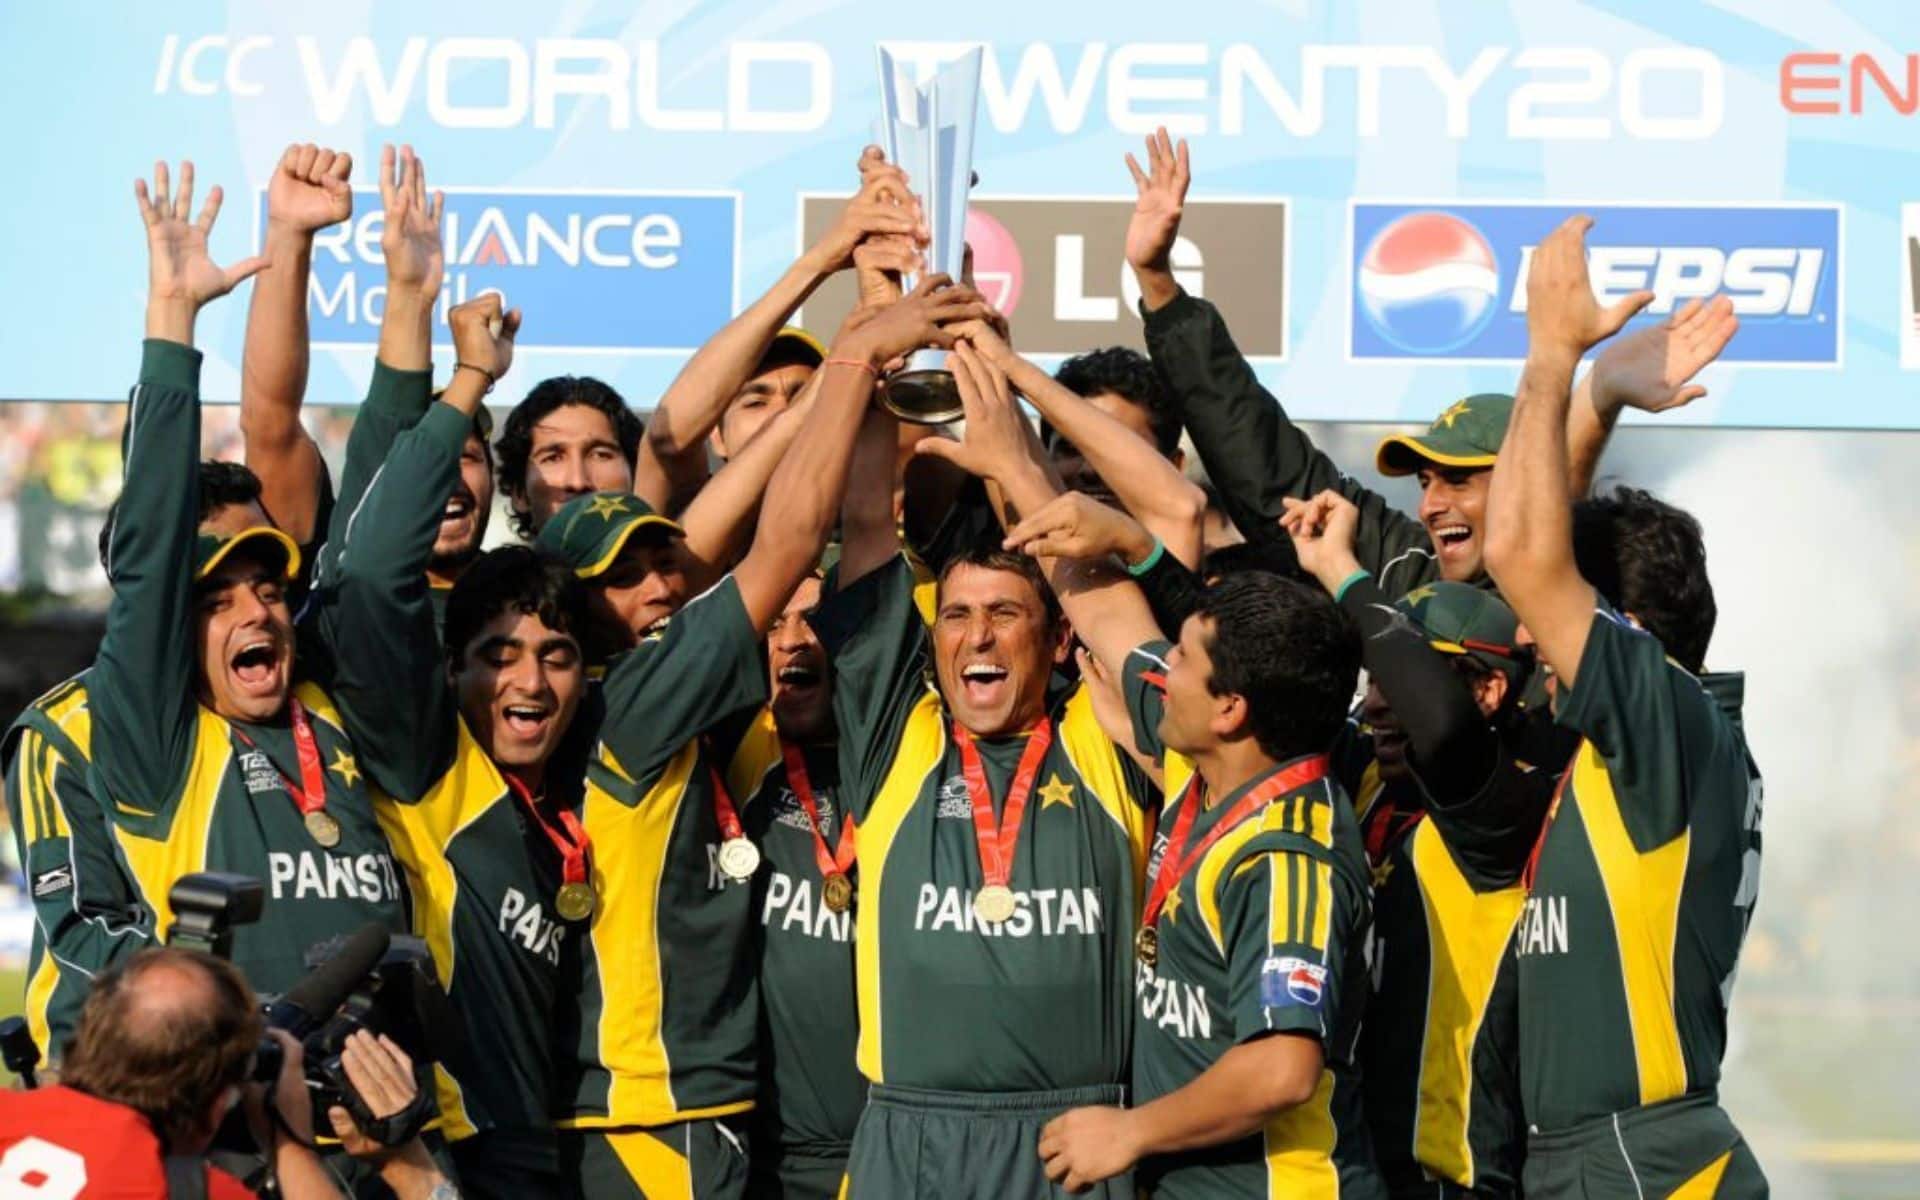 Younis Khan's captaincy was scrapped after winning T20 WC (x.com)